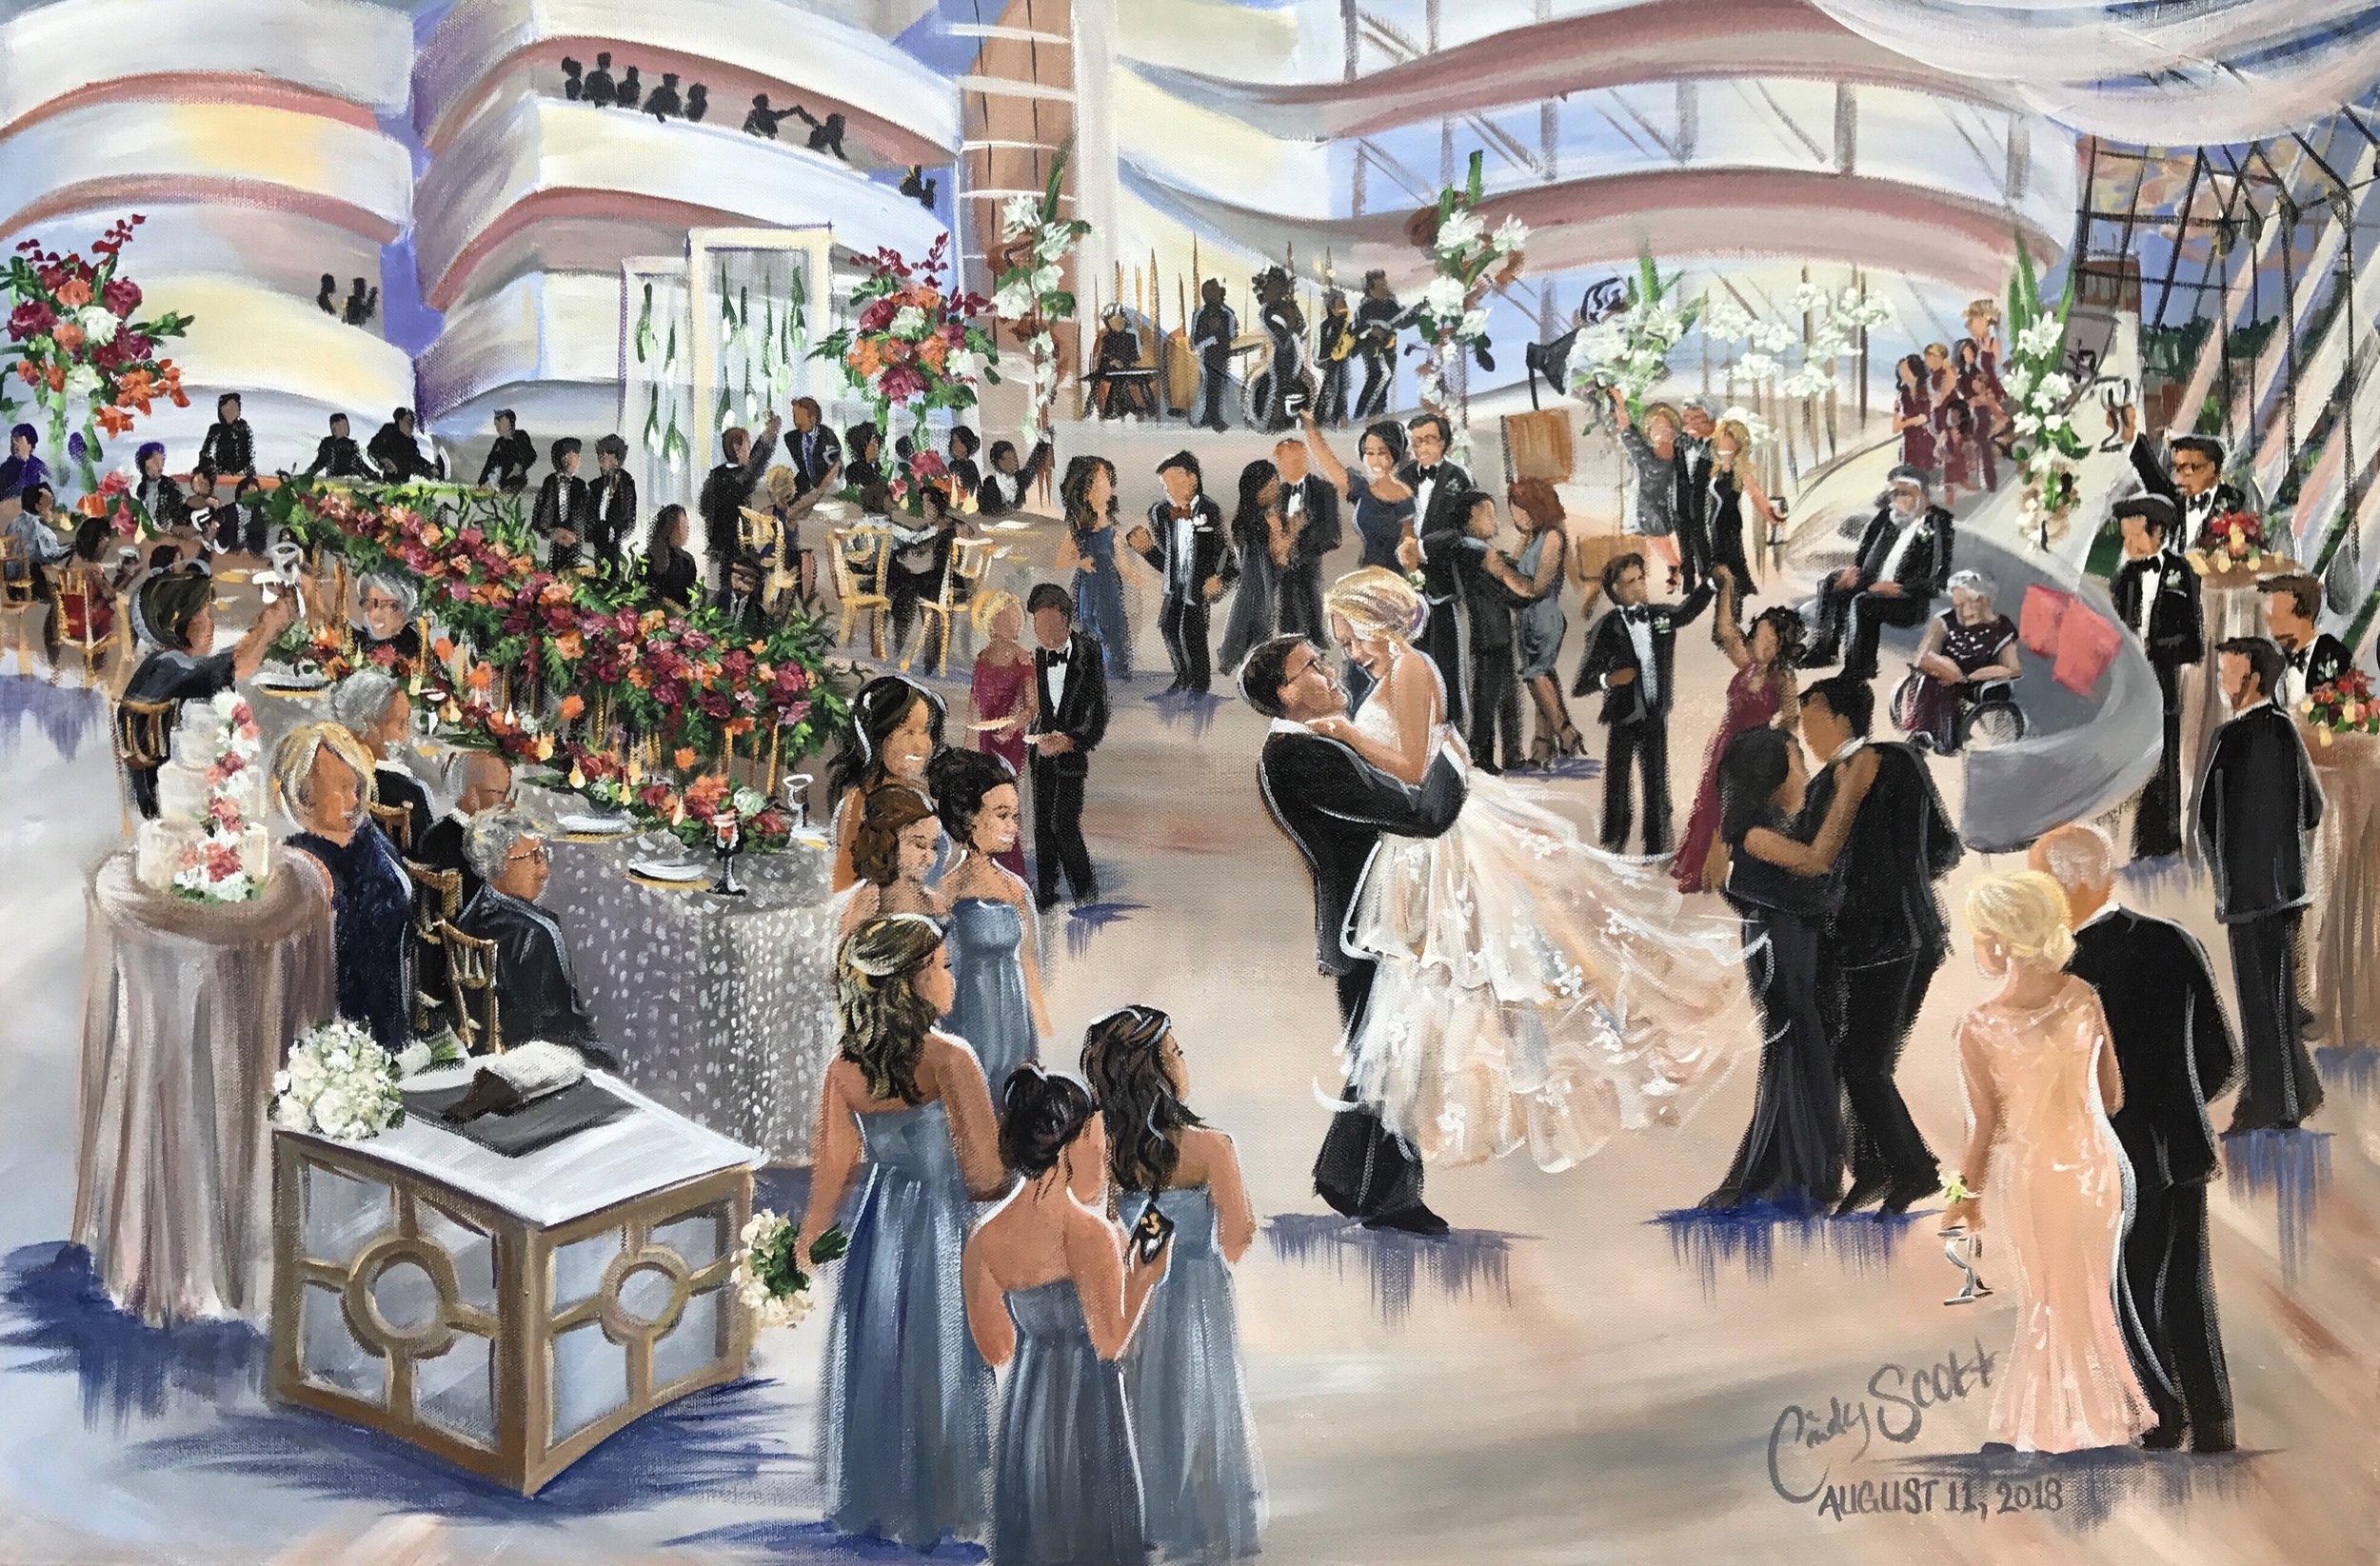 First dance live wedding painting, Kauffman Center for the Performing Arts in Kansas City MO; 24x36 canvas